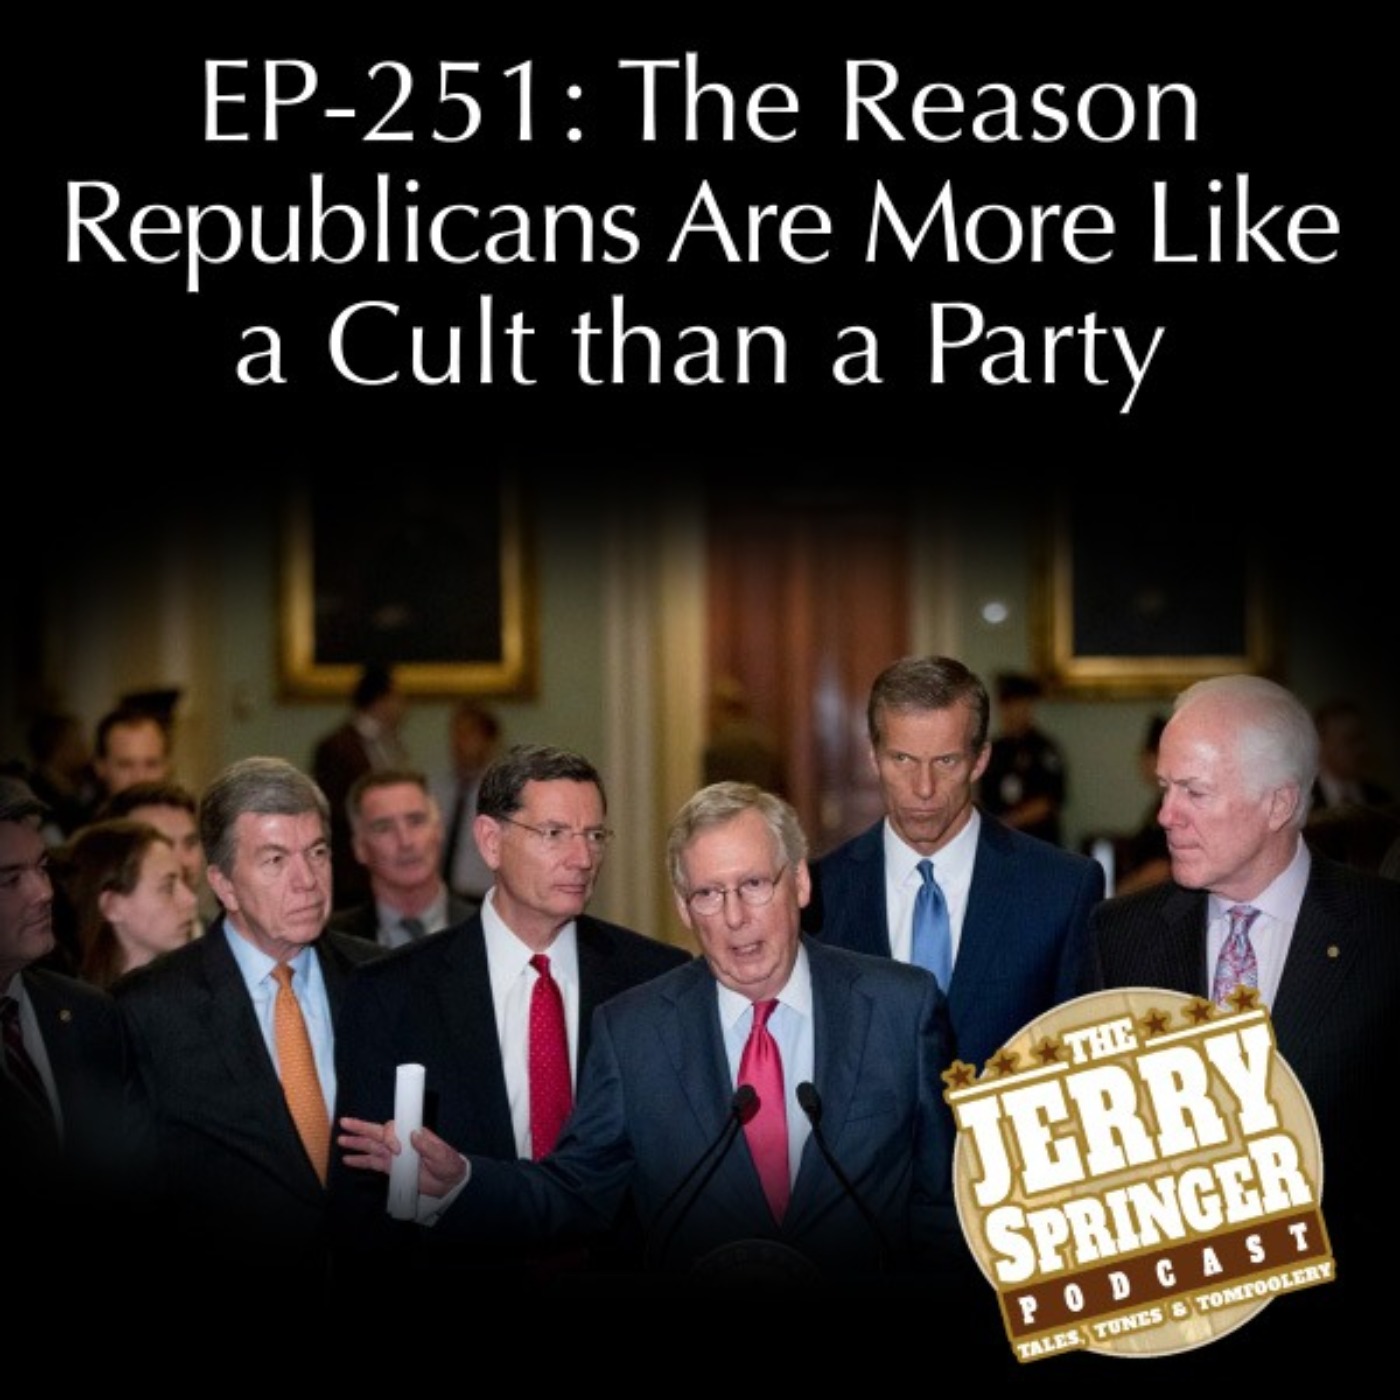 The Reason Republicans Are More Like a Cult than a Party - EP251